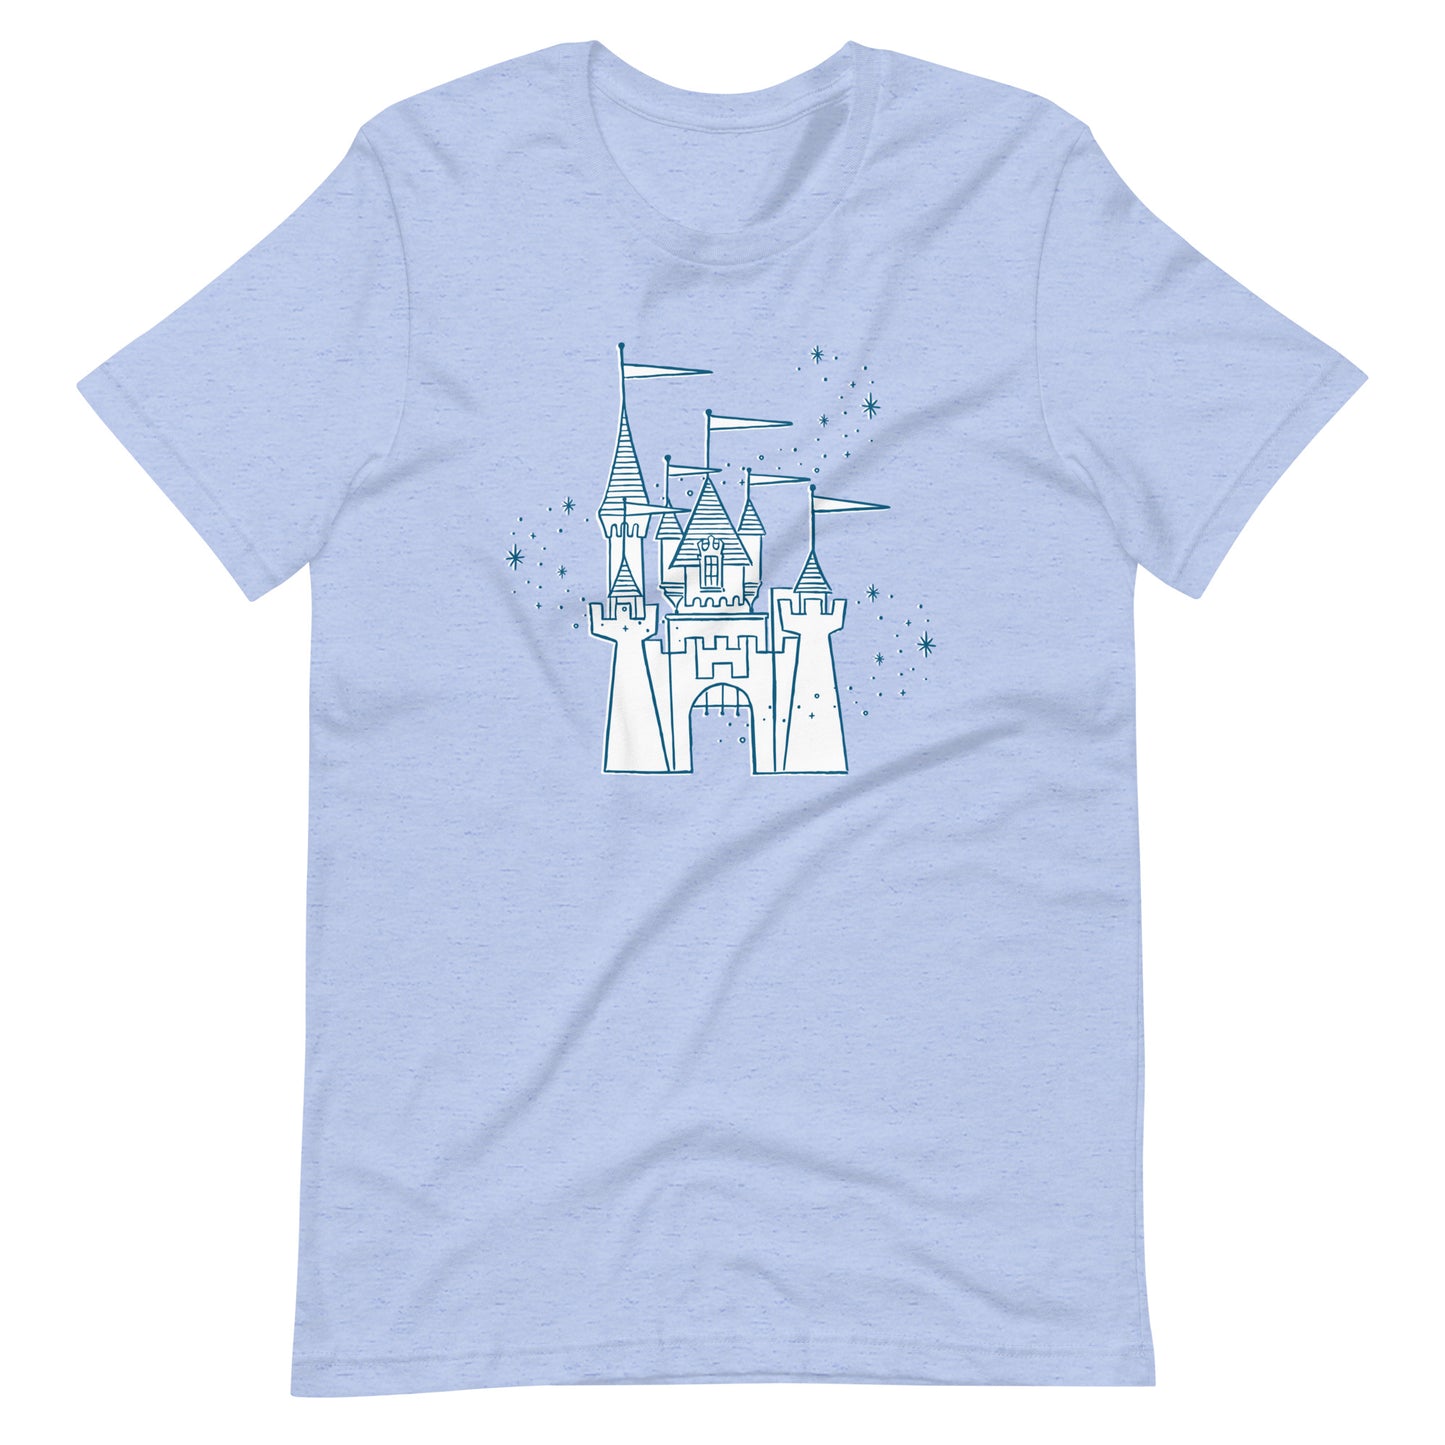 Blue shirt printed with vintage style sketch of the Disneyland Castle and pixie dust above the castle.